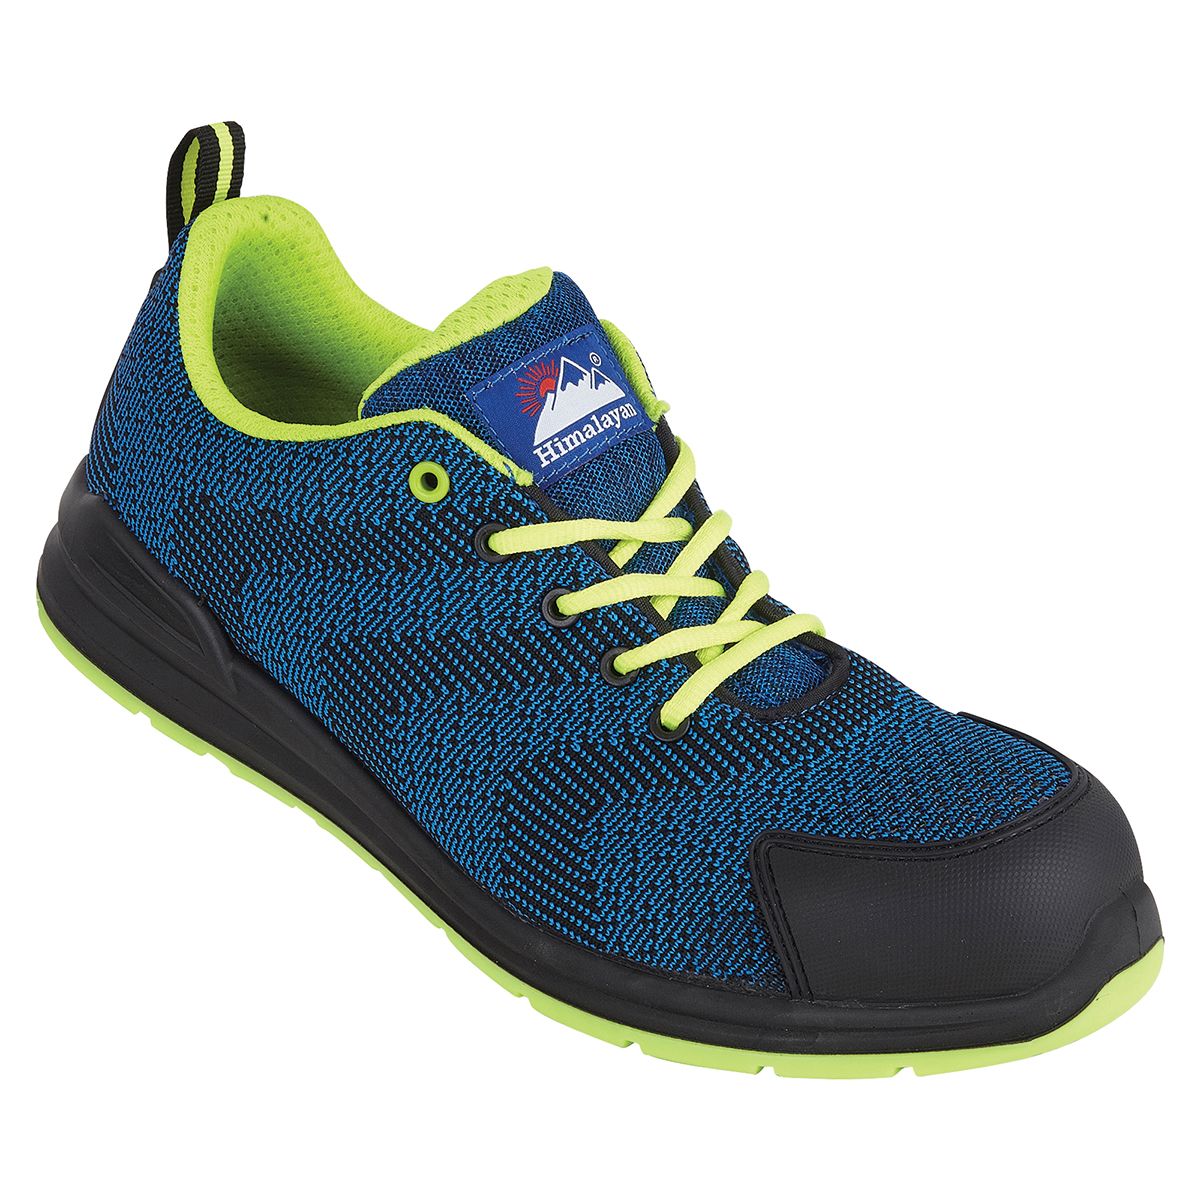 Himalayan 4340 Unisex Blue Toe Capped Safety Trainers, UK 13, EU 48